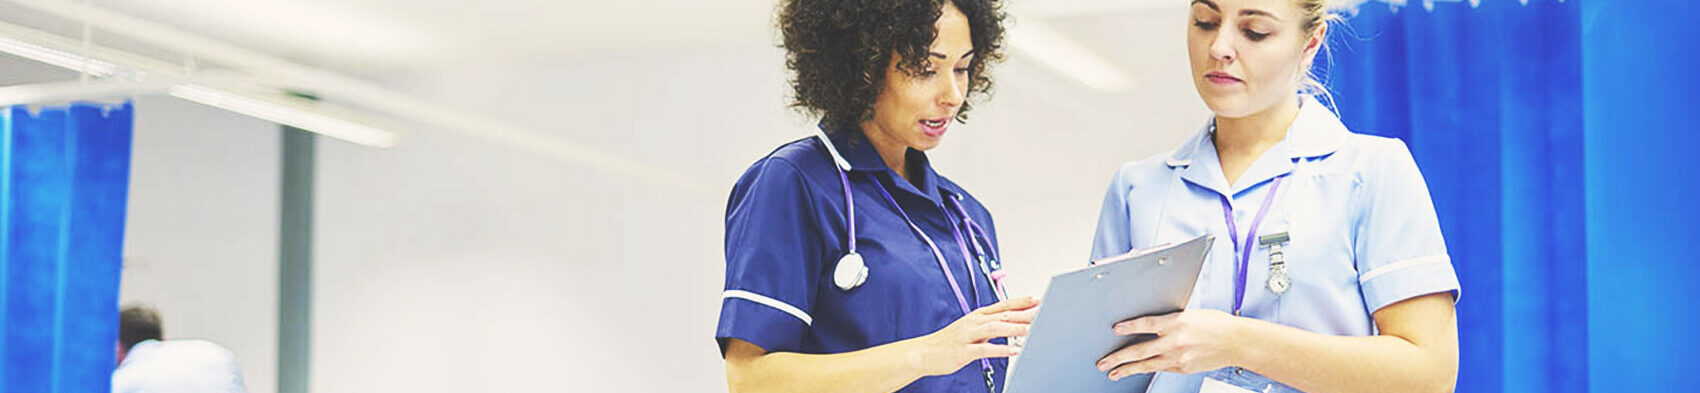 The Top 5 Benefits of Working as a Nurse in the UK